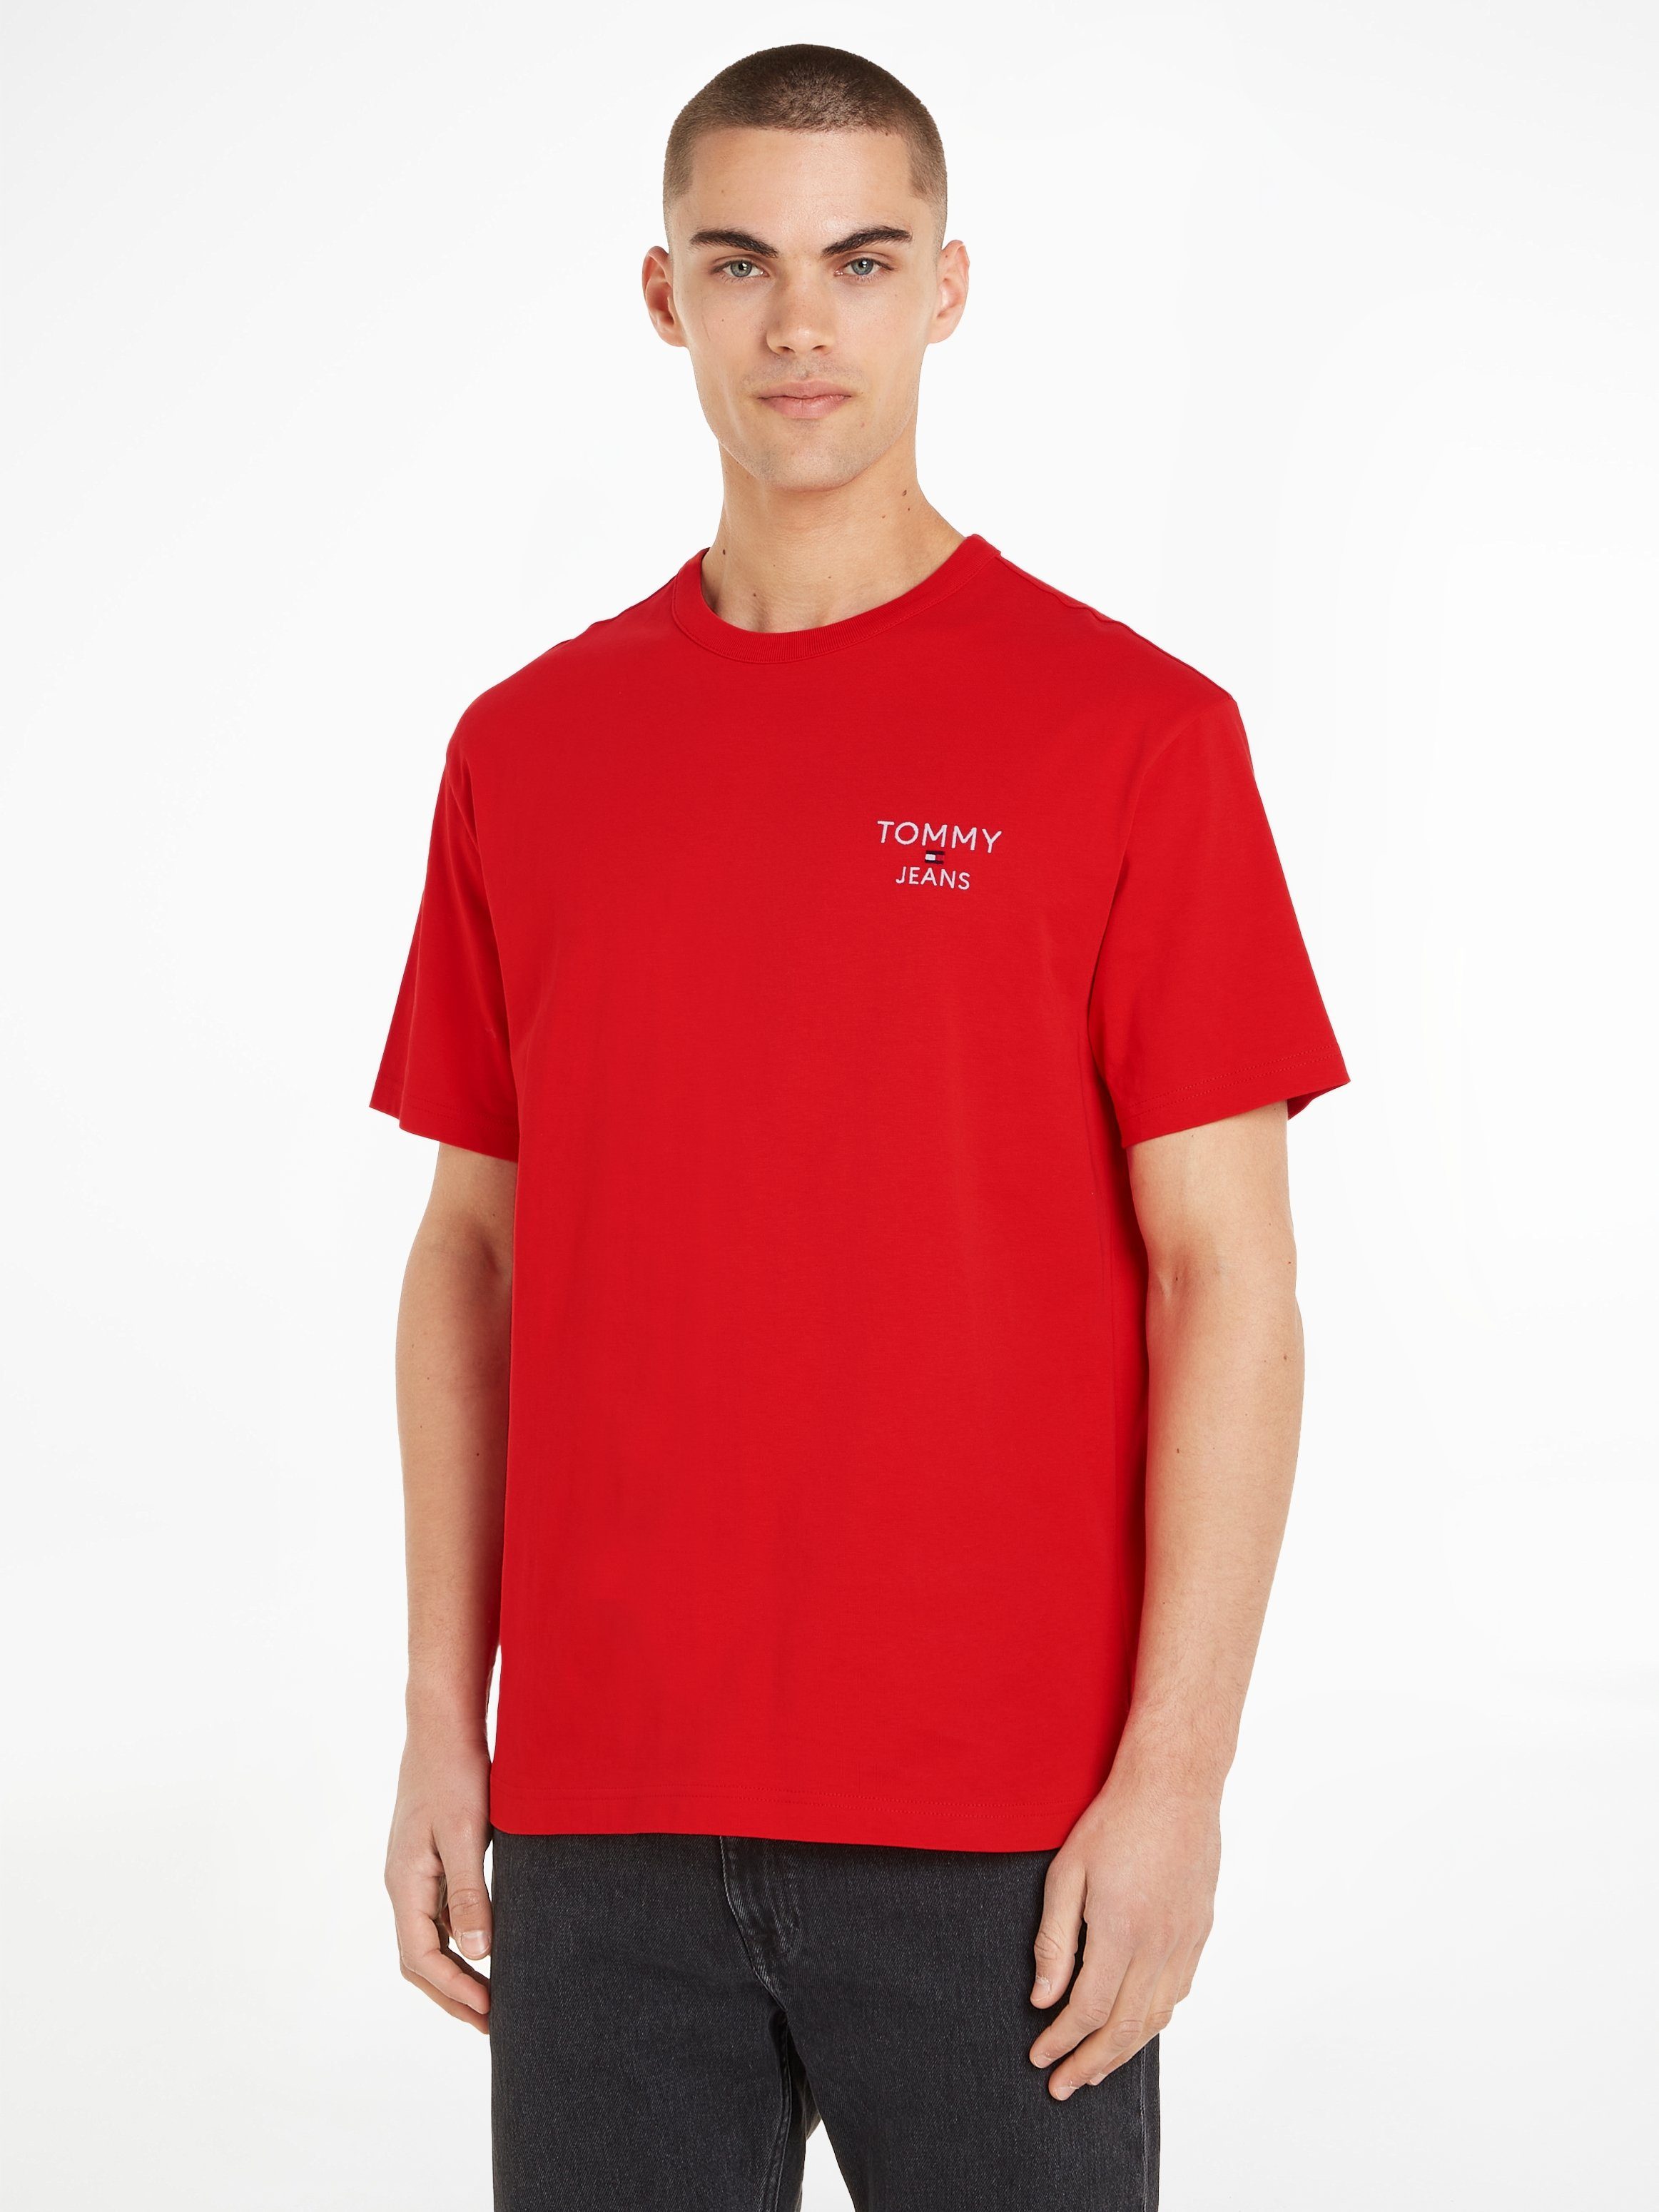 Tommy Jeans T-Shirt REG TJM mit EXT CORP Jeans Tommy Stickerei TEE